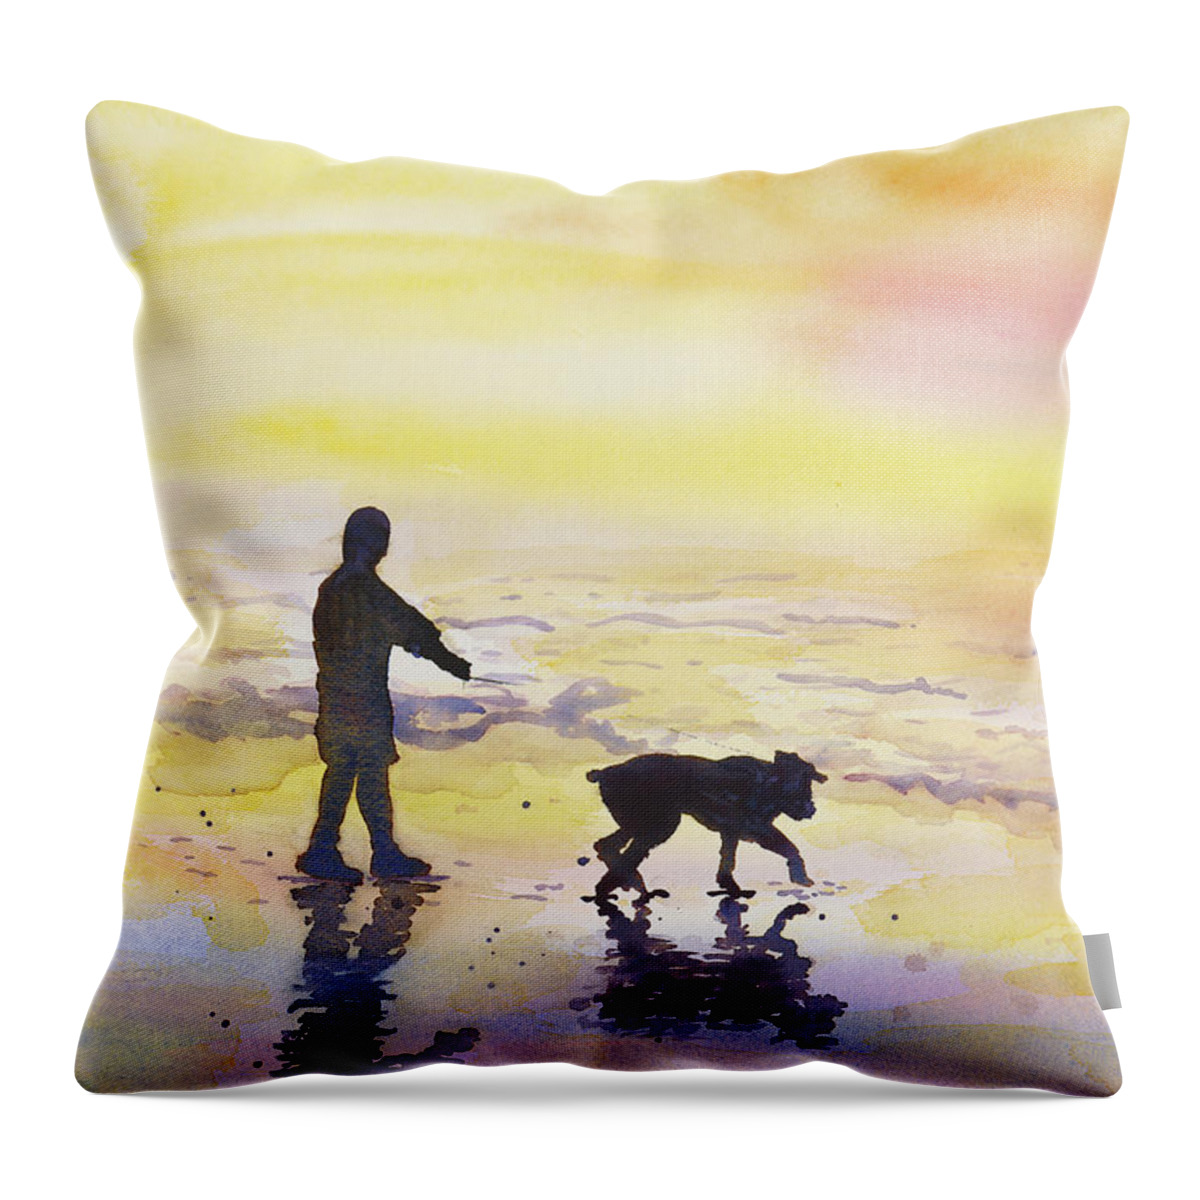 Reflections Throw Pillow featuring the painting Morning reflections by Lisa Debaets